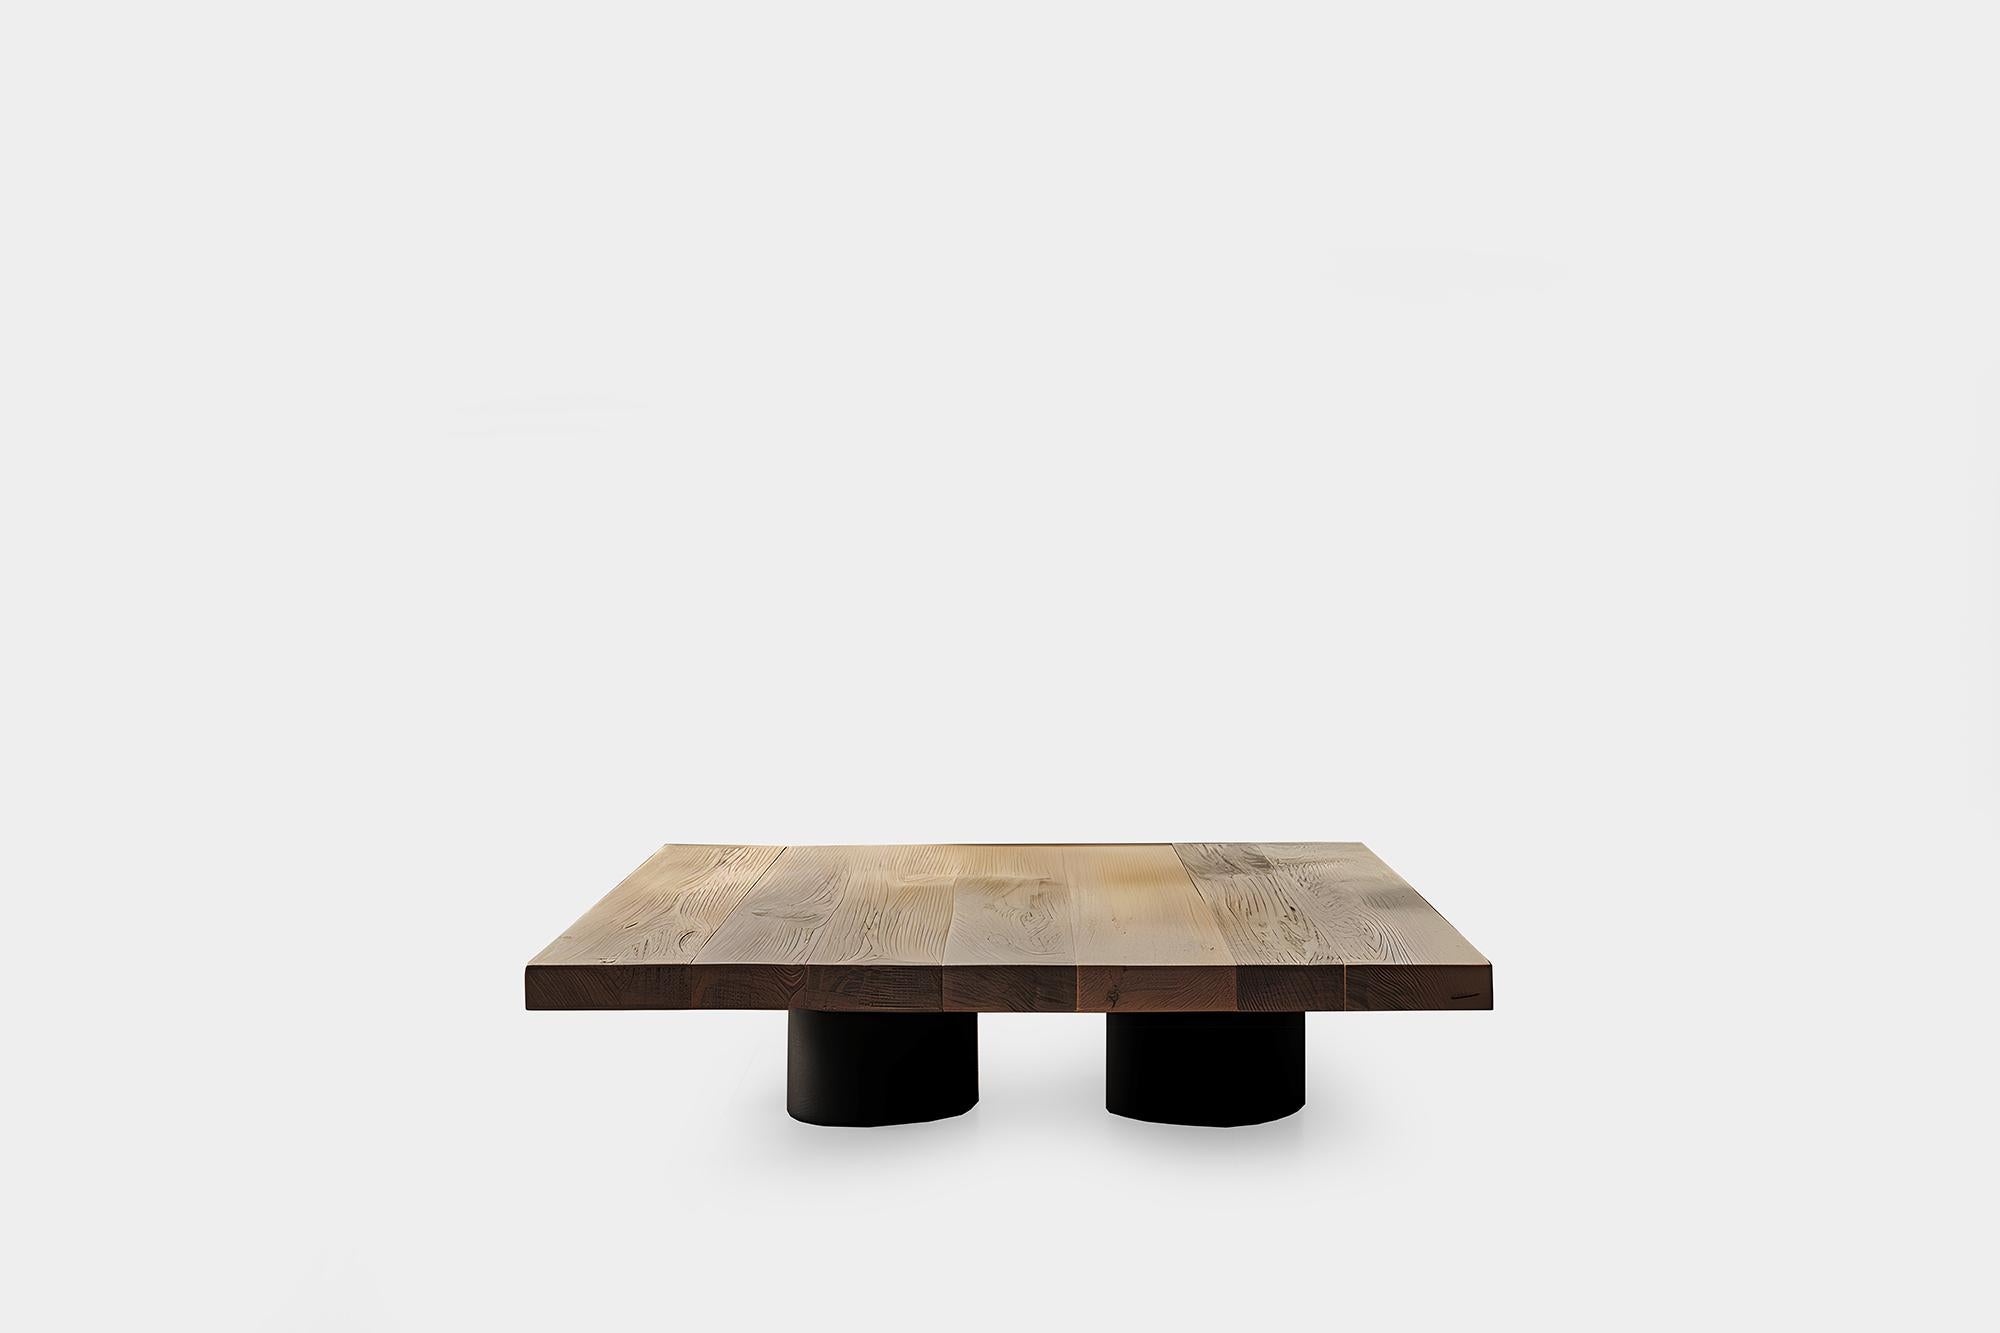 Natural Finish Rectangular Coffee Table - Classic Fundamenta 28 by NONO


Sculptural coffee table made of solid wood with a natural water-based or black tinted finish. Due to the nature of the production process, each piece may vary in grain,